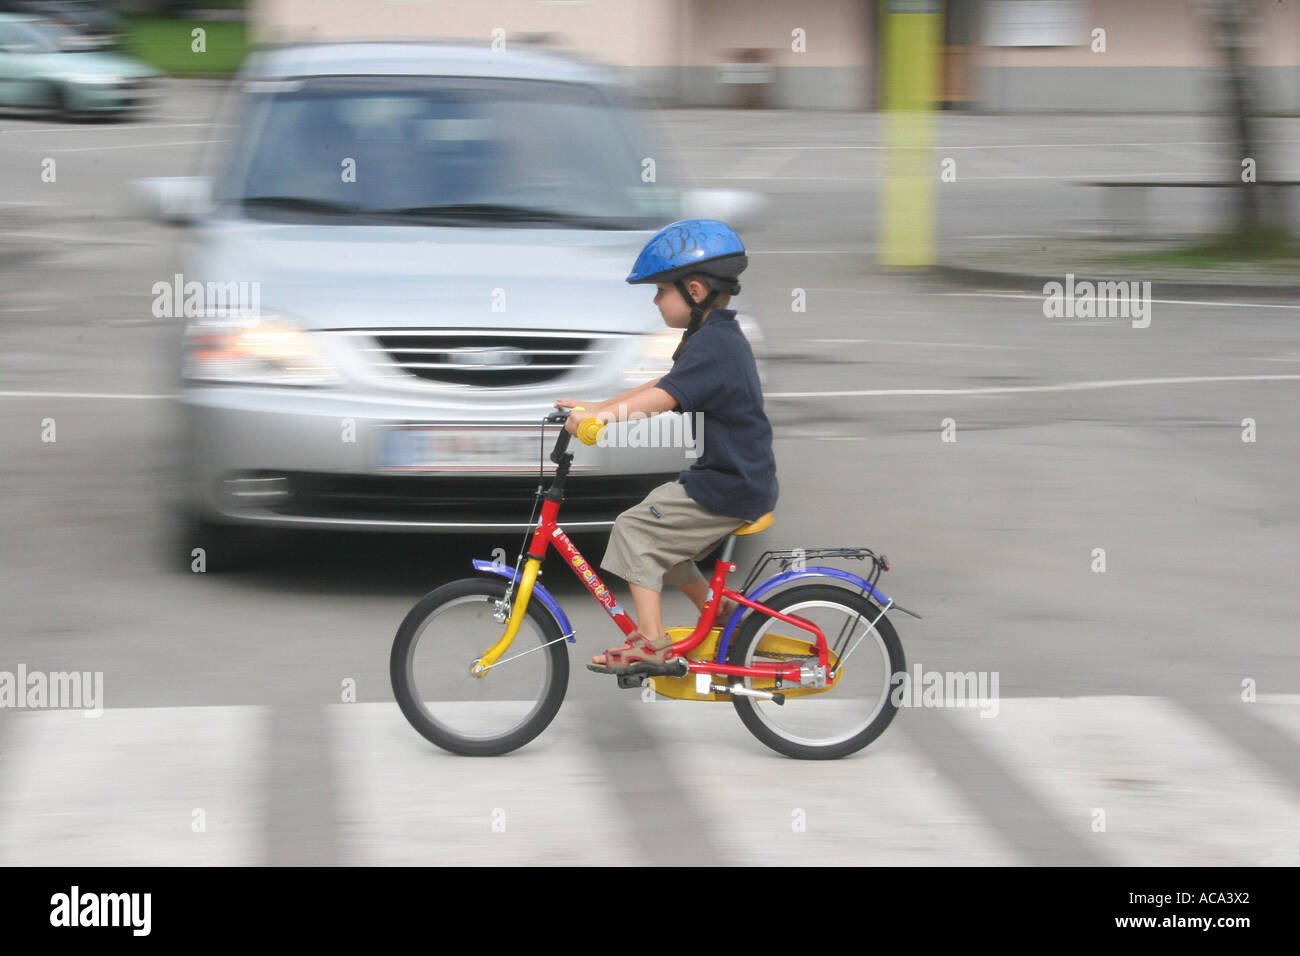 Child with a bicycle on pedestrian crossing Stock Photo